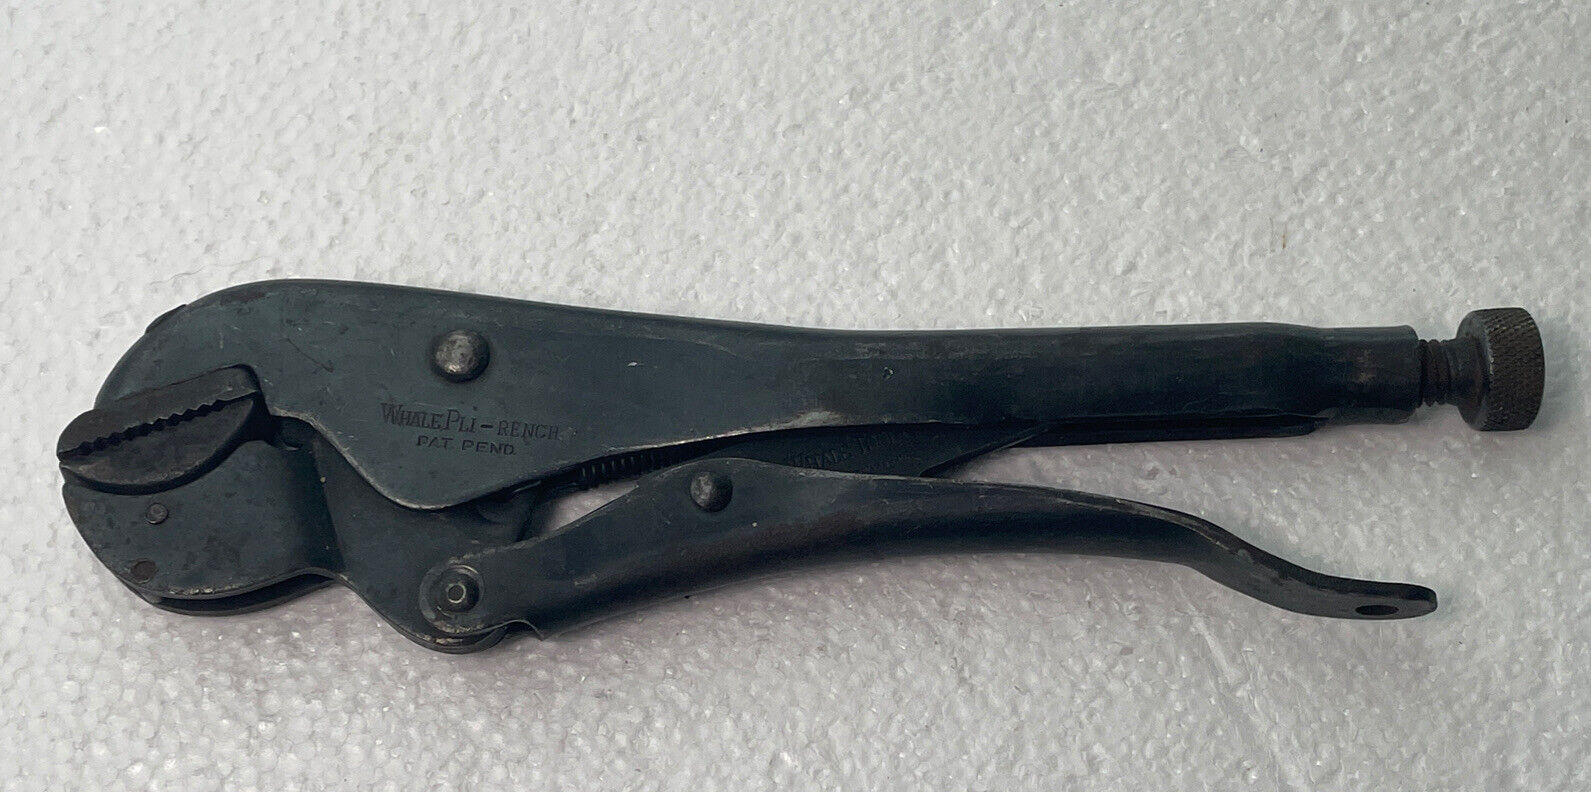 Whale Tool Corp. Pli-Rench Adjustable Locking Pliers Early Pat. Pending Set